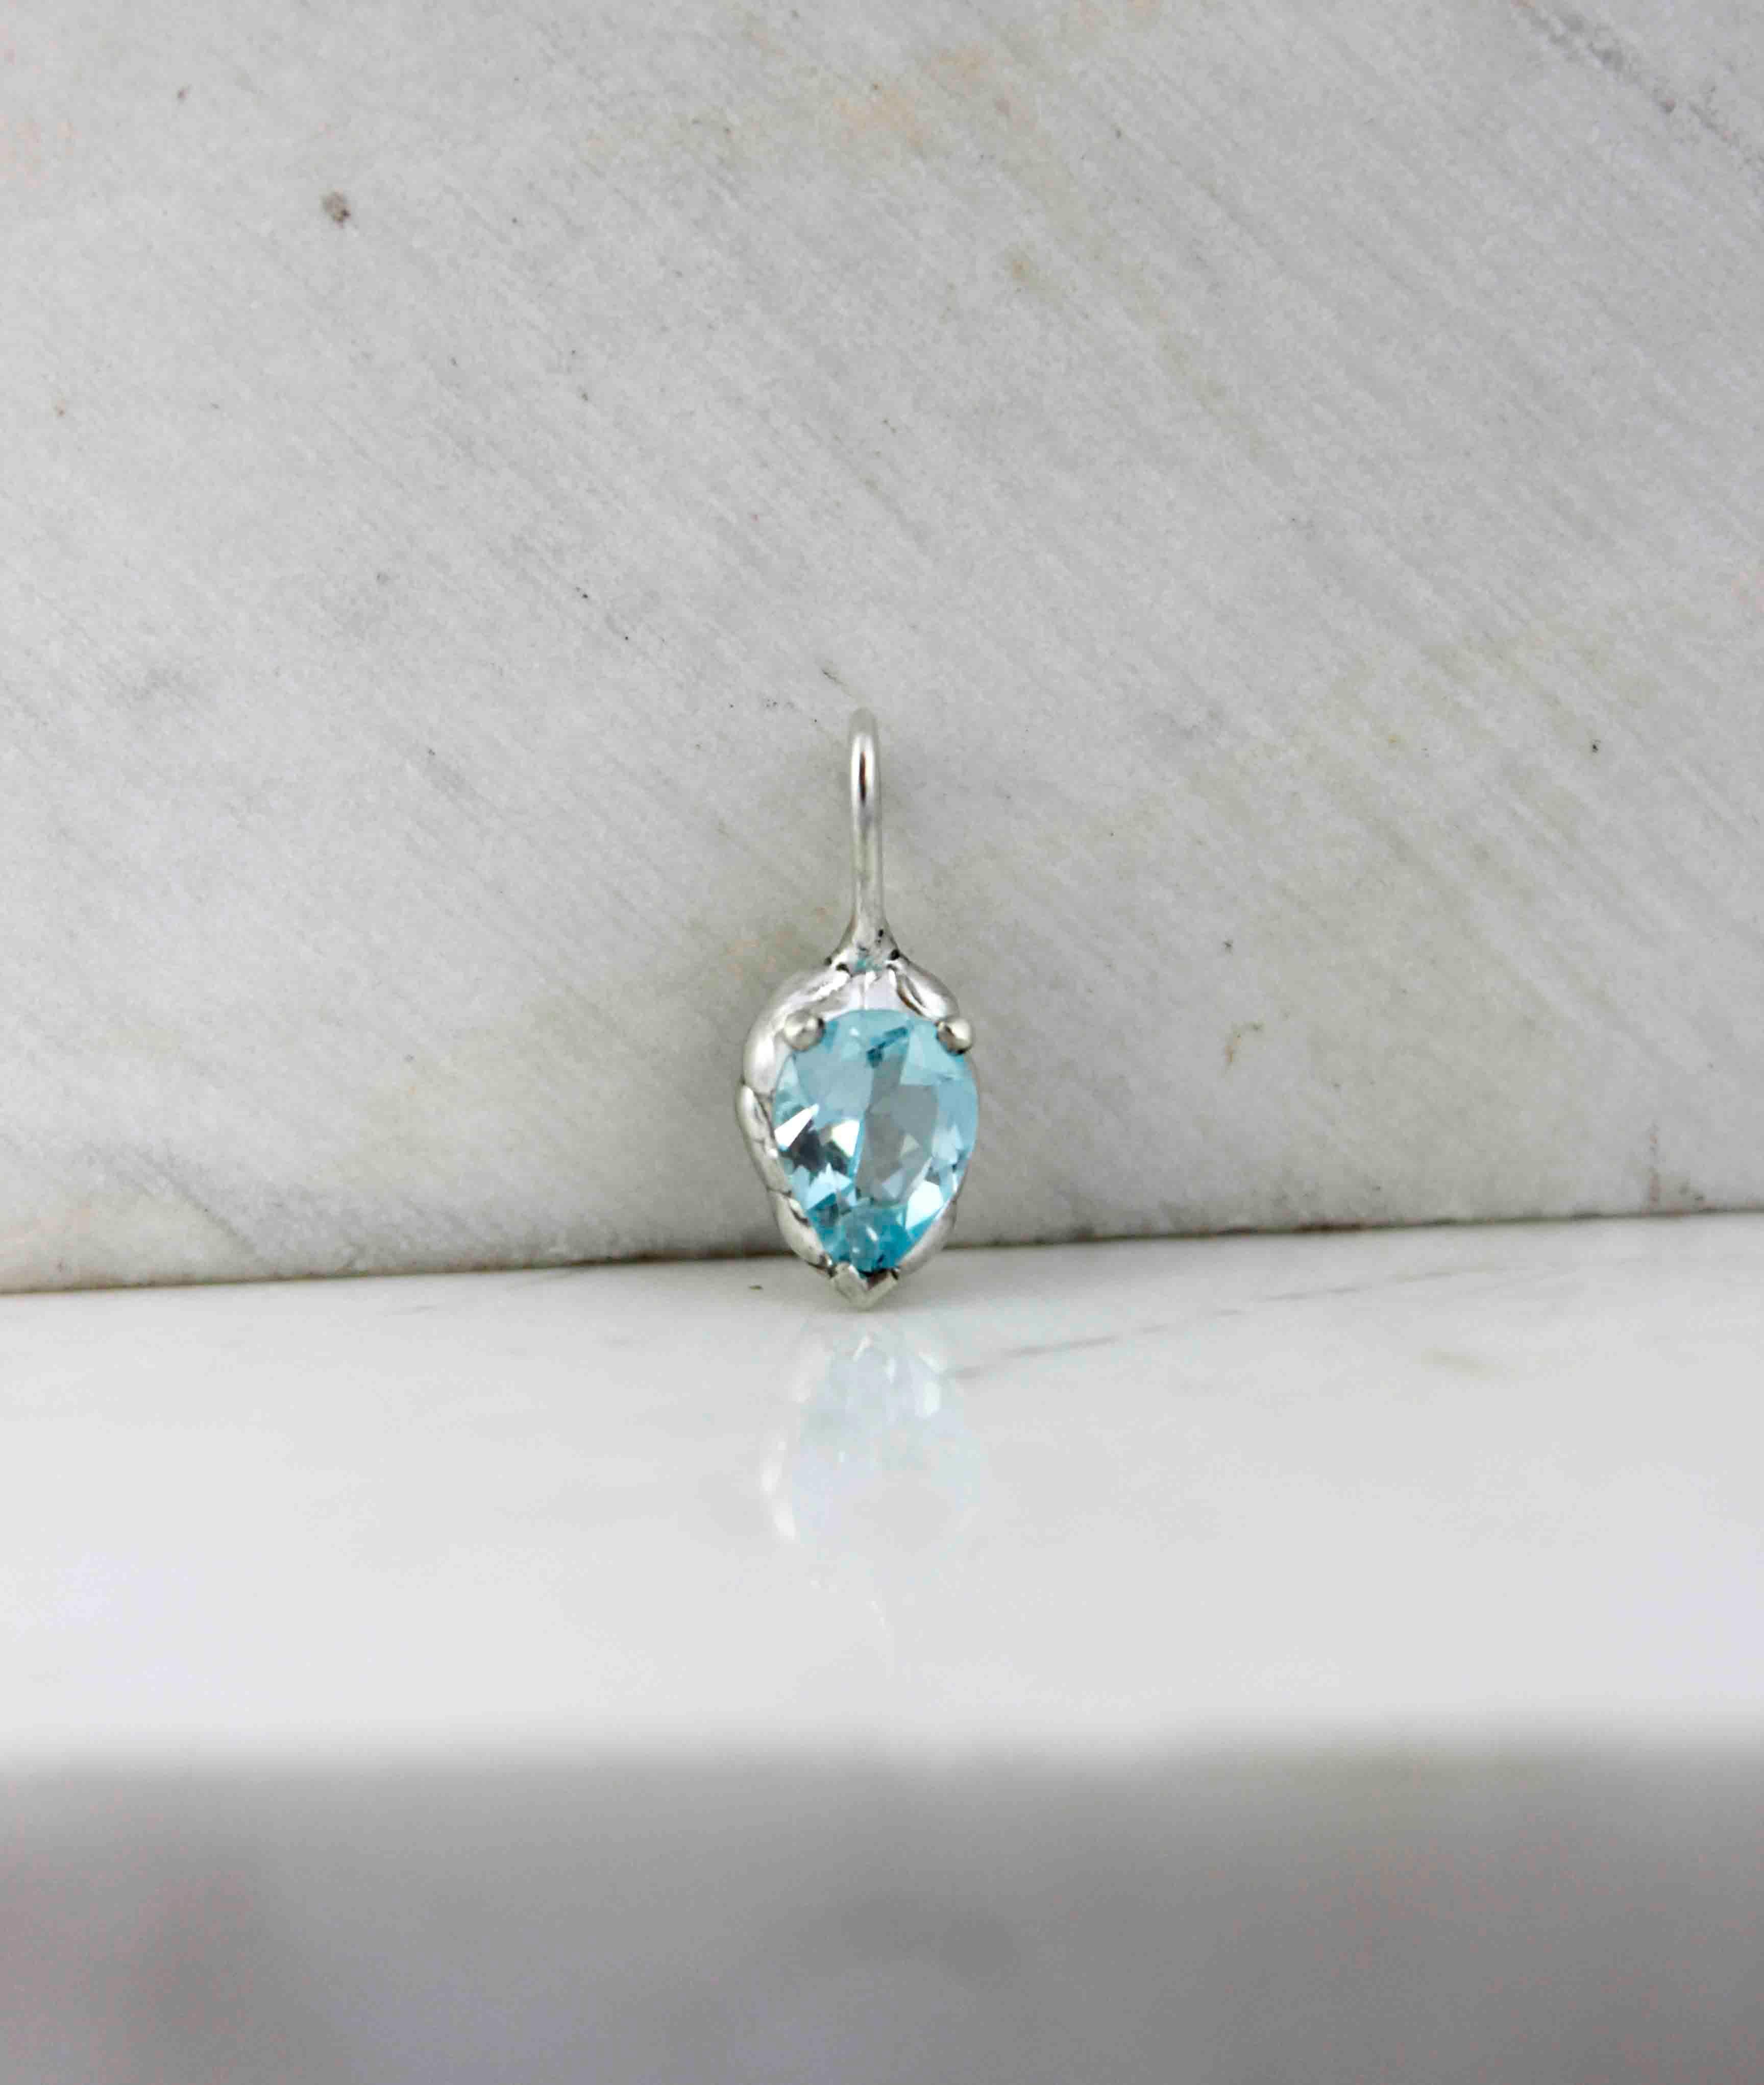 A delicate blue topaz necklace, which can also be worn as a charm, with your own chain.

You can choose to only get the charm necklace, and make your favourite combination. The hoop shape allows it to easily hang from any chain.

Alternative, you